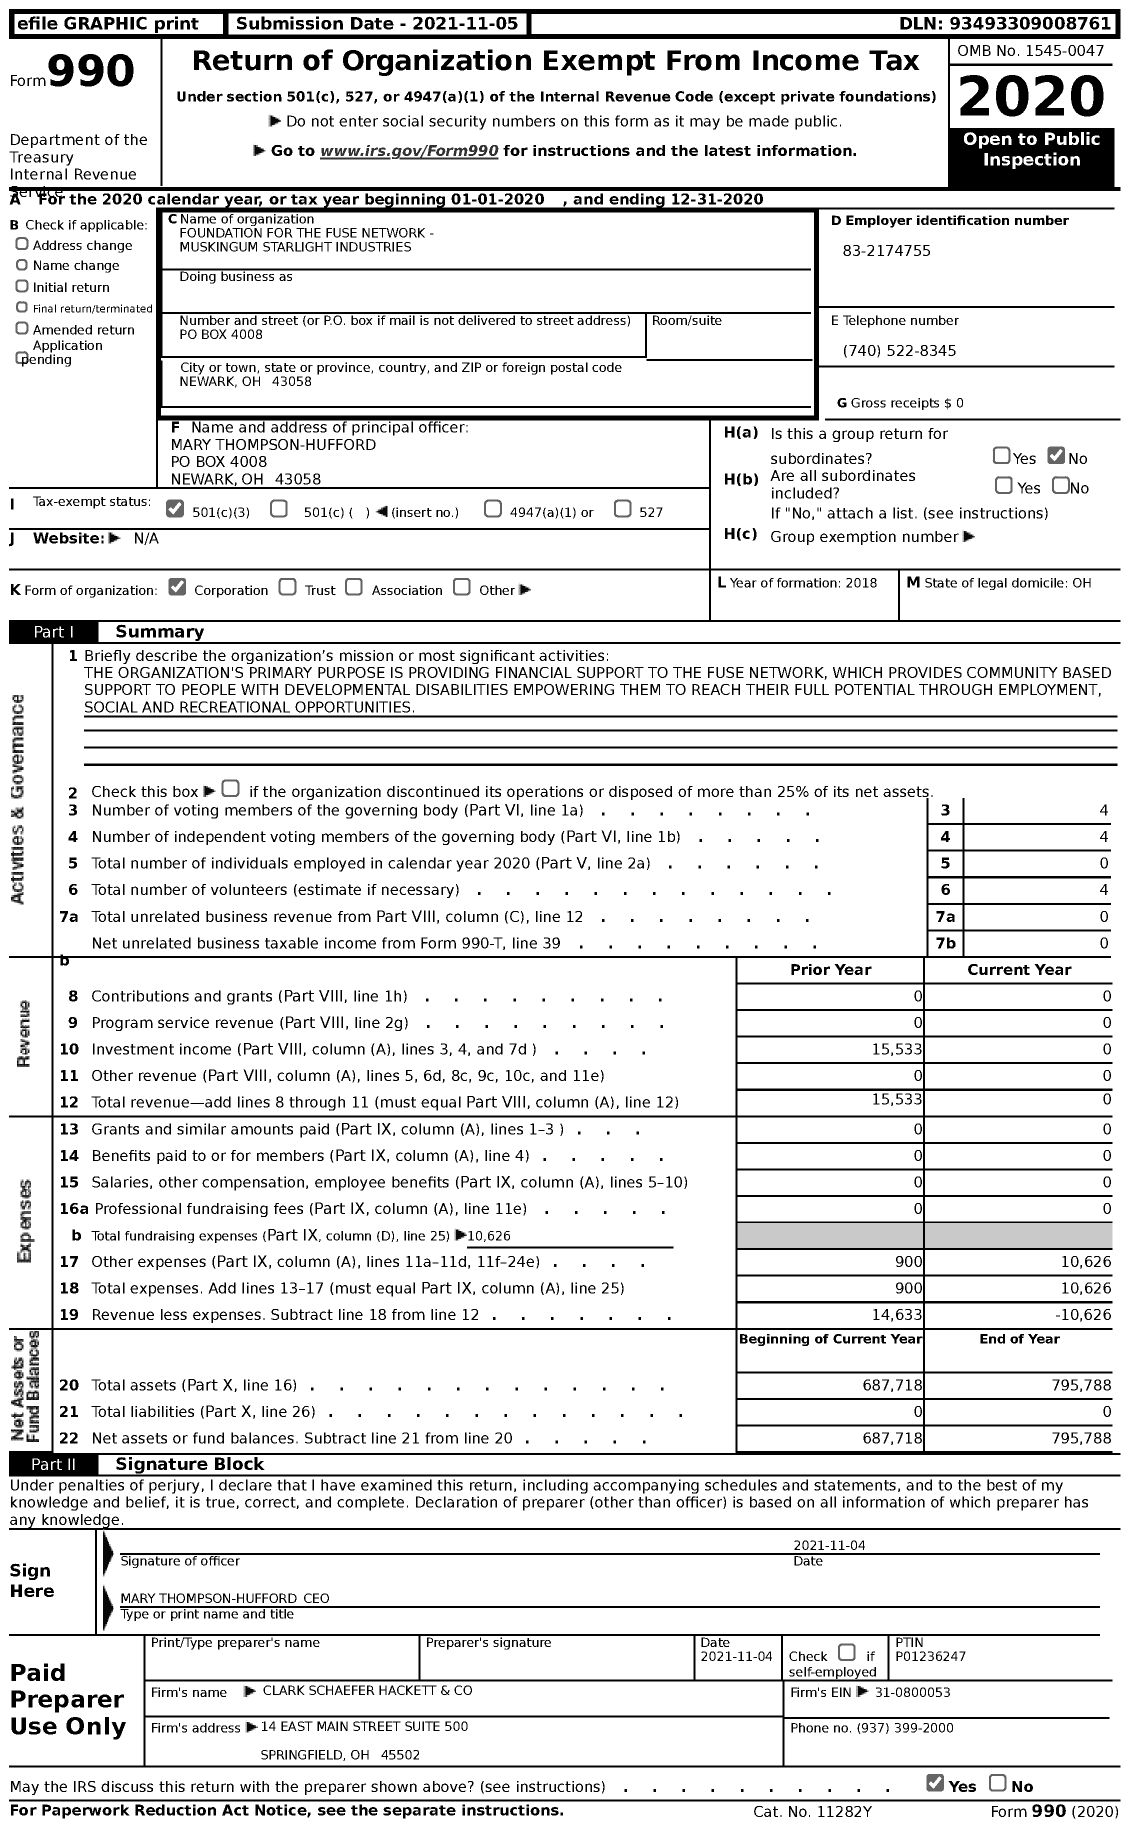 Image of first page of 2020 Form 990 for Foundation for the Fuse Network - Muskingum Starlight Industries